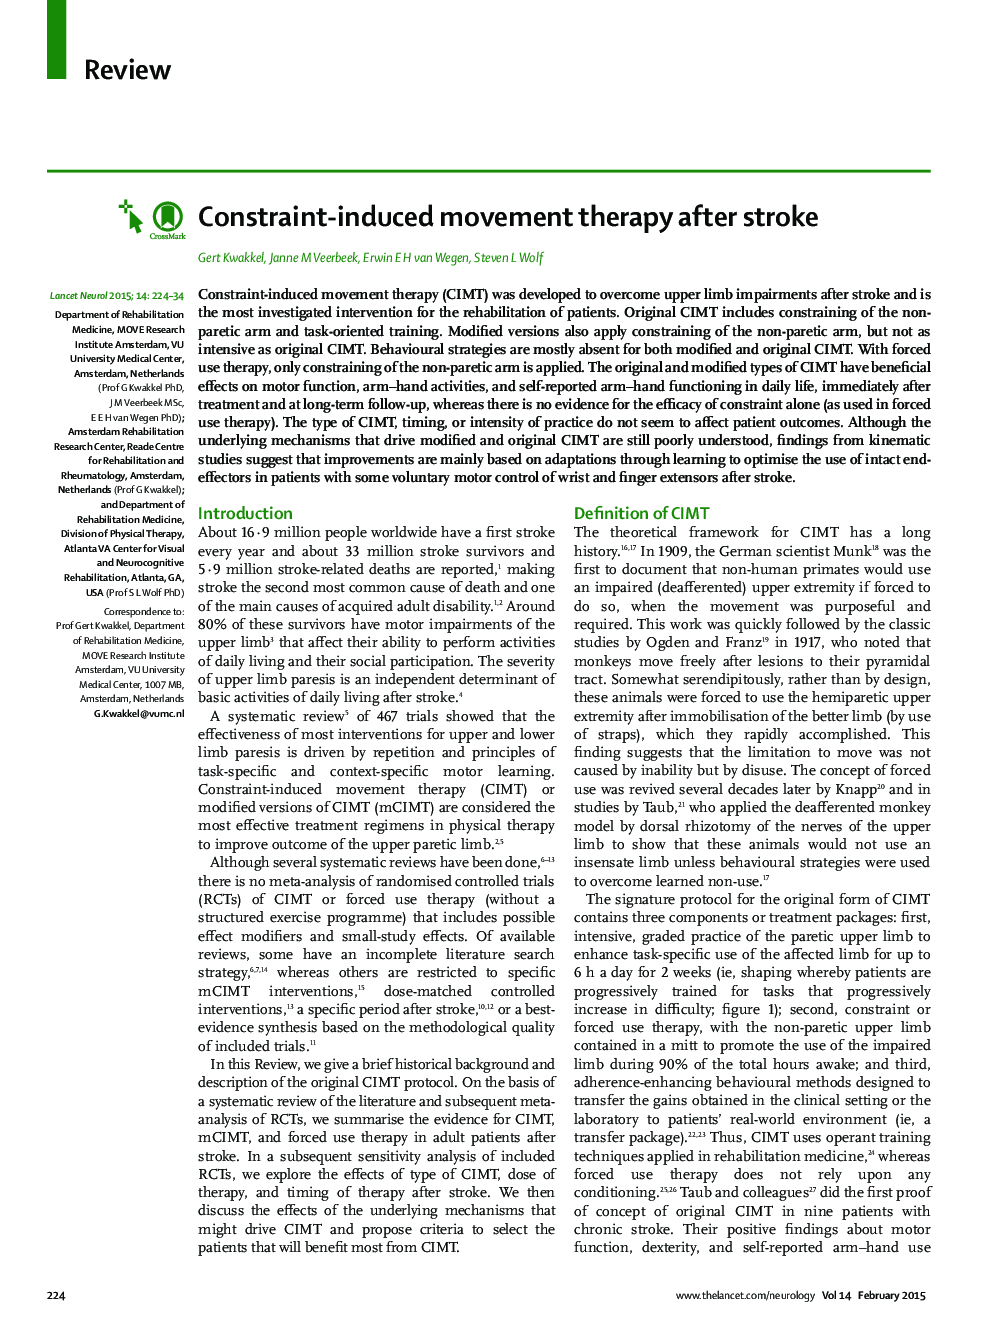 Constraint-induced movement therapy after stroke